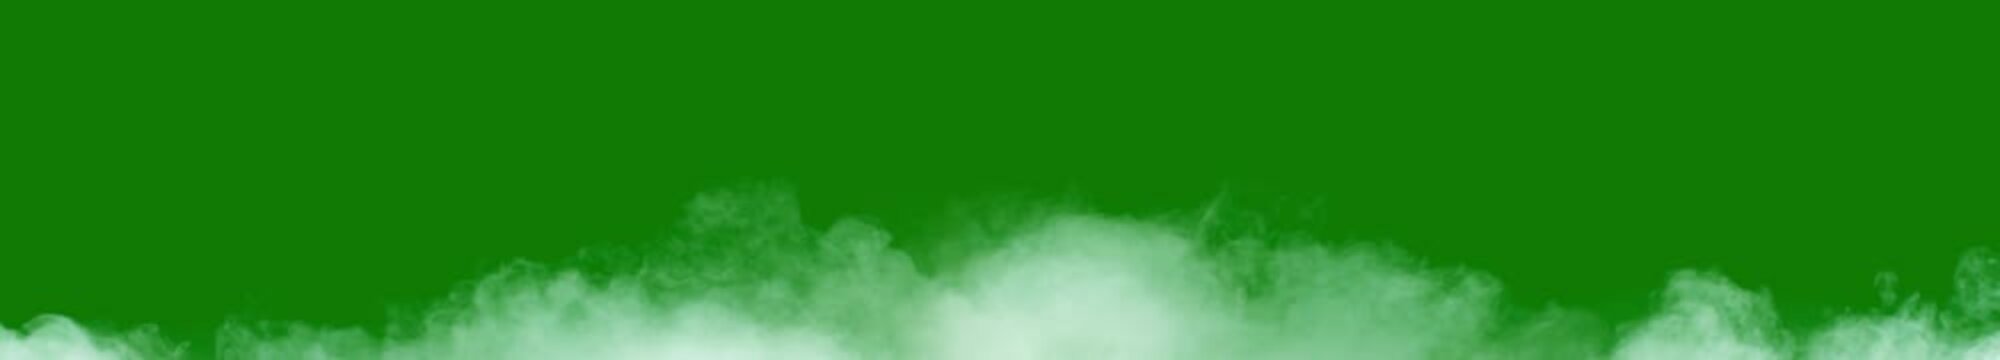 steam. White cloud. white smoke isolated on green screen background